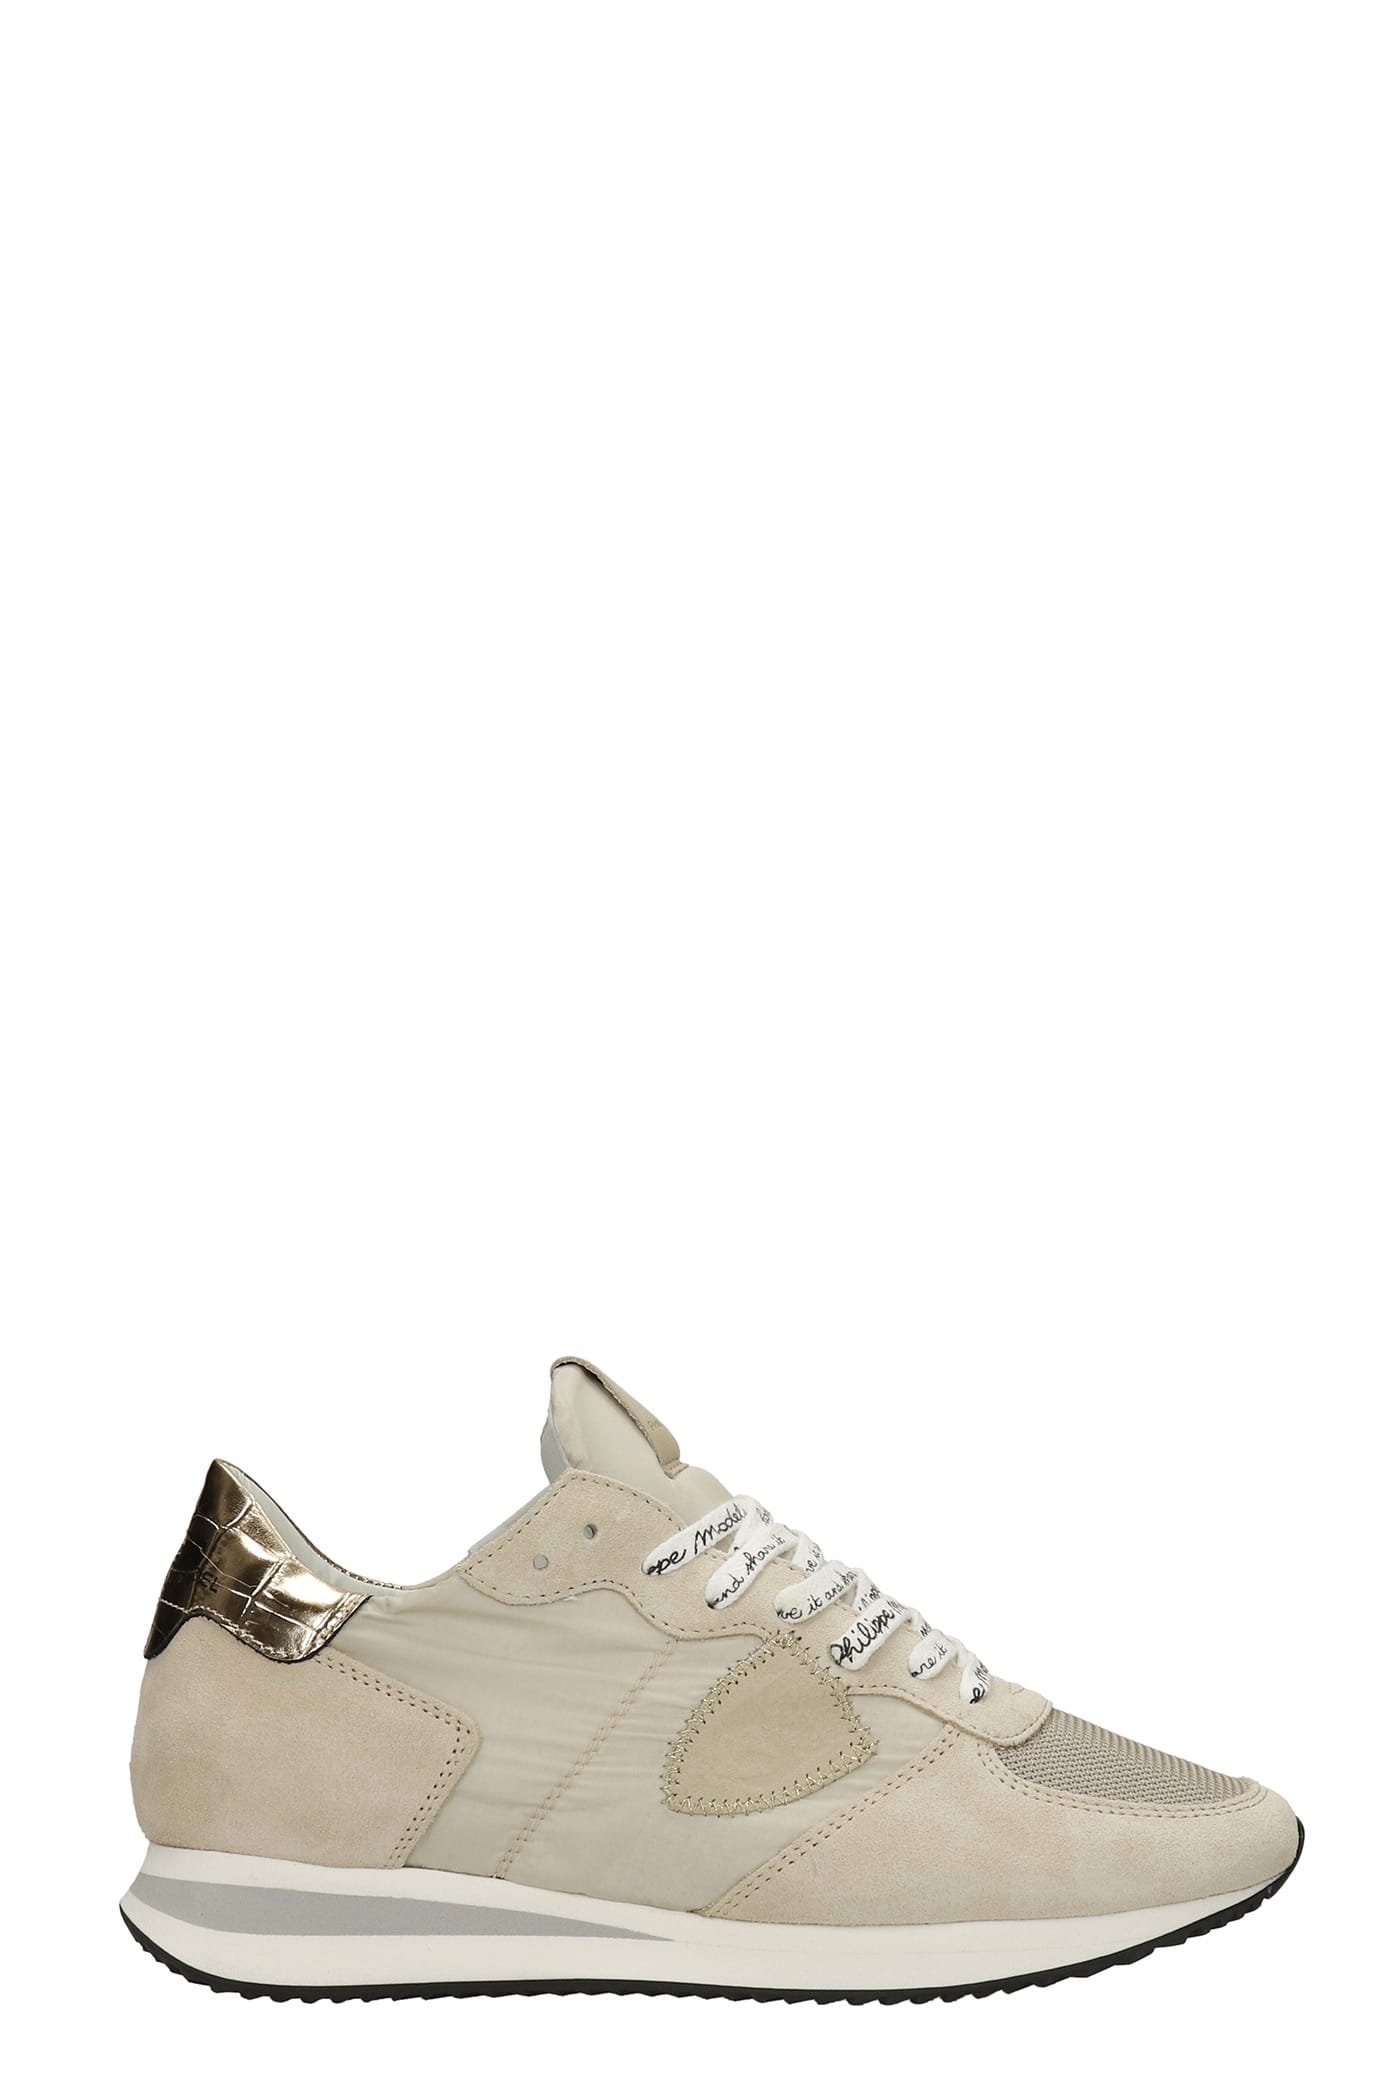 Philippe Model Trpx Sneakers In Beige Suede And Fabric